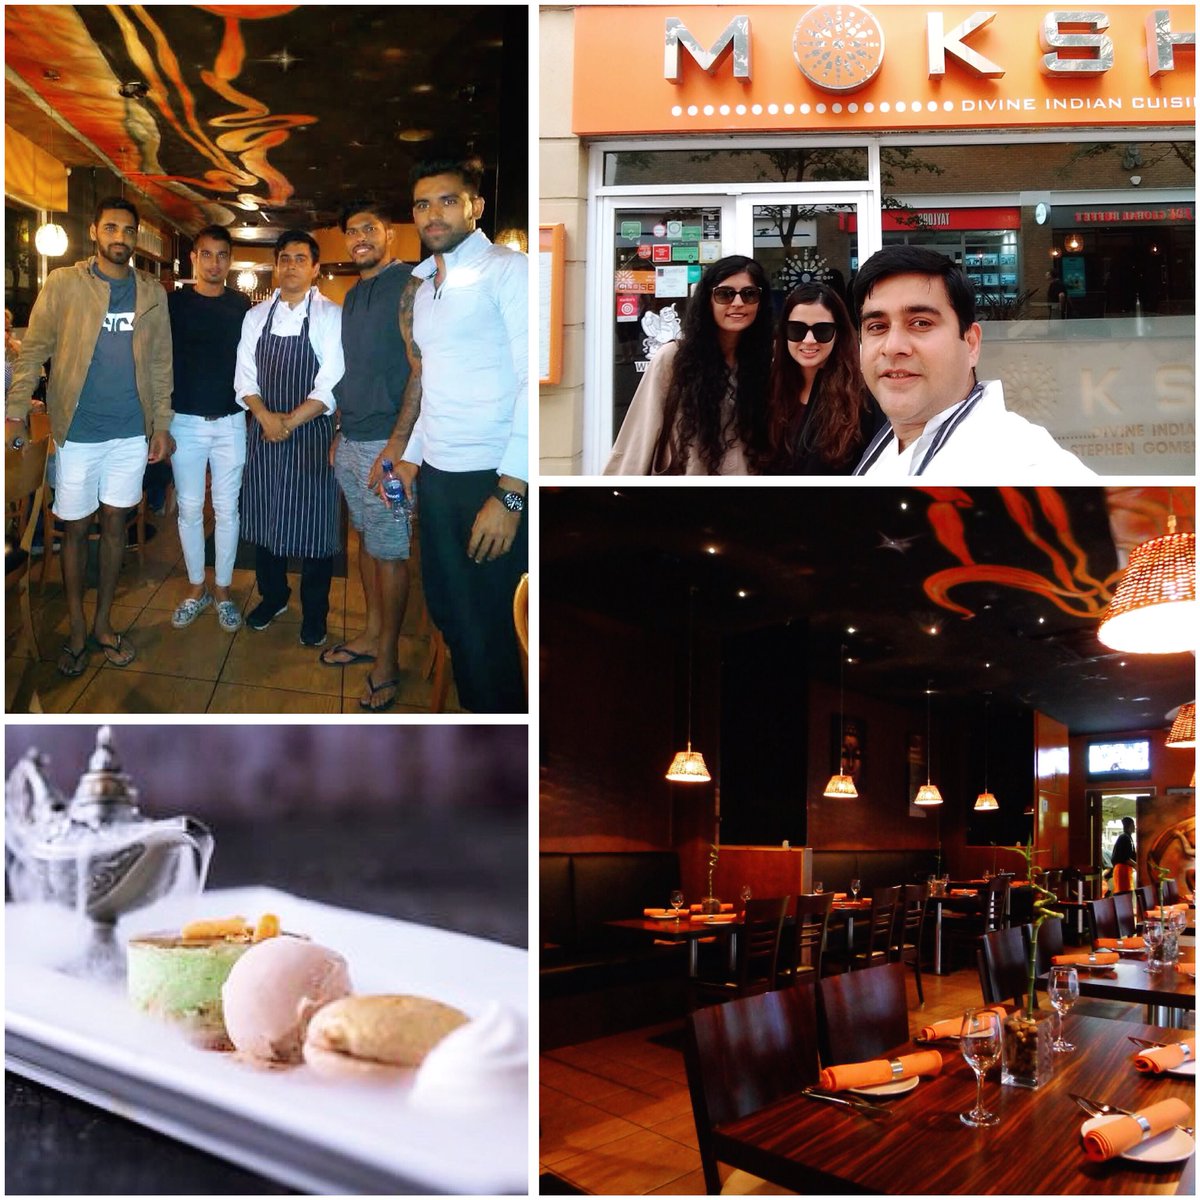 A sporty evening at Moksh🏏
Our Head Chef, Manish cooking up a storm for the Indian Cricket Team and their lovely partners!
.
.
#indiancricketteam #mokshcardiffbay #celeblife #momentstocherish